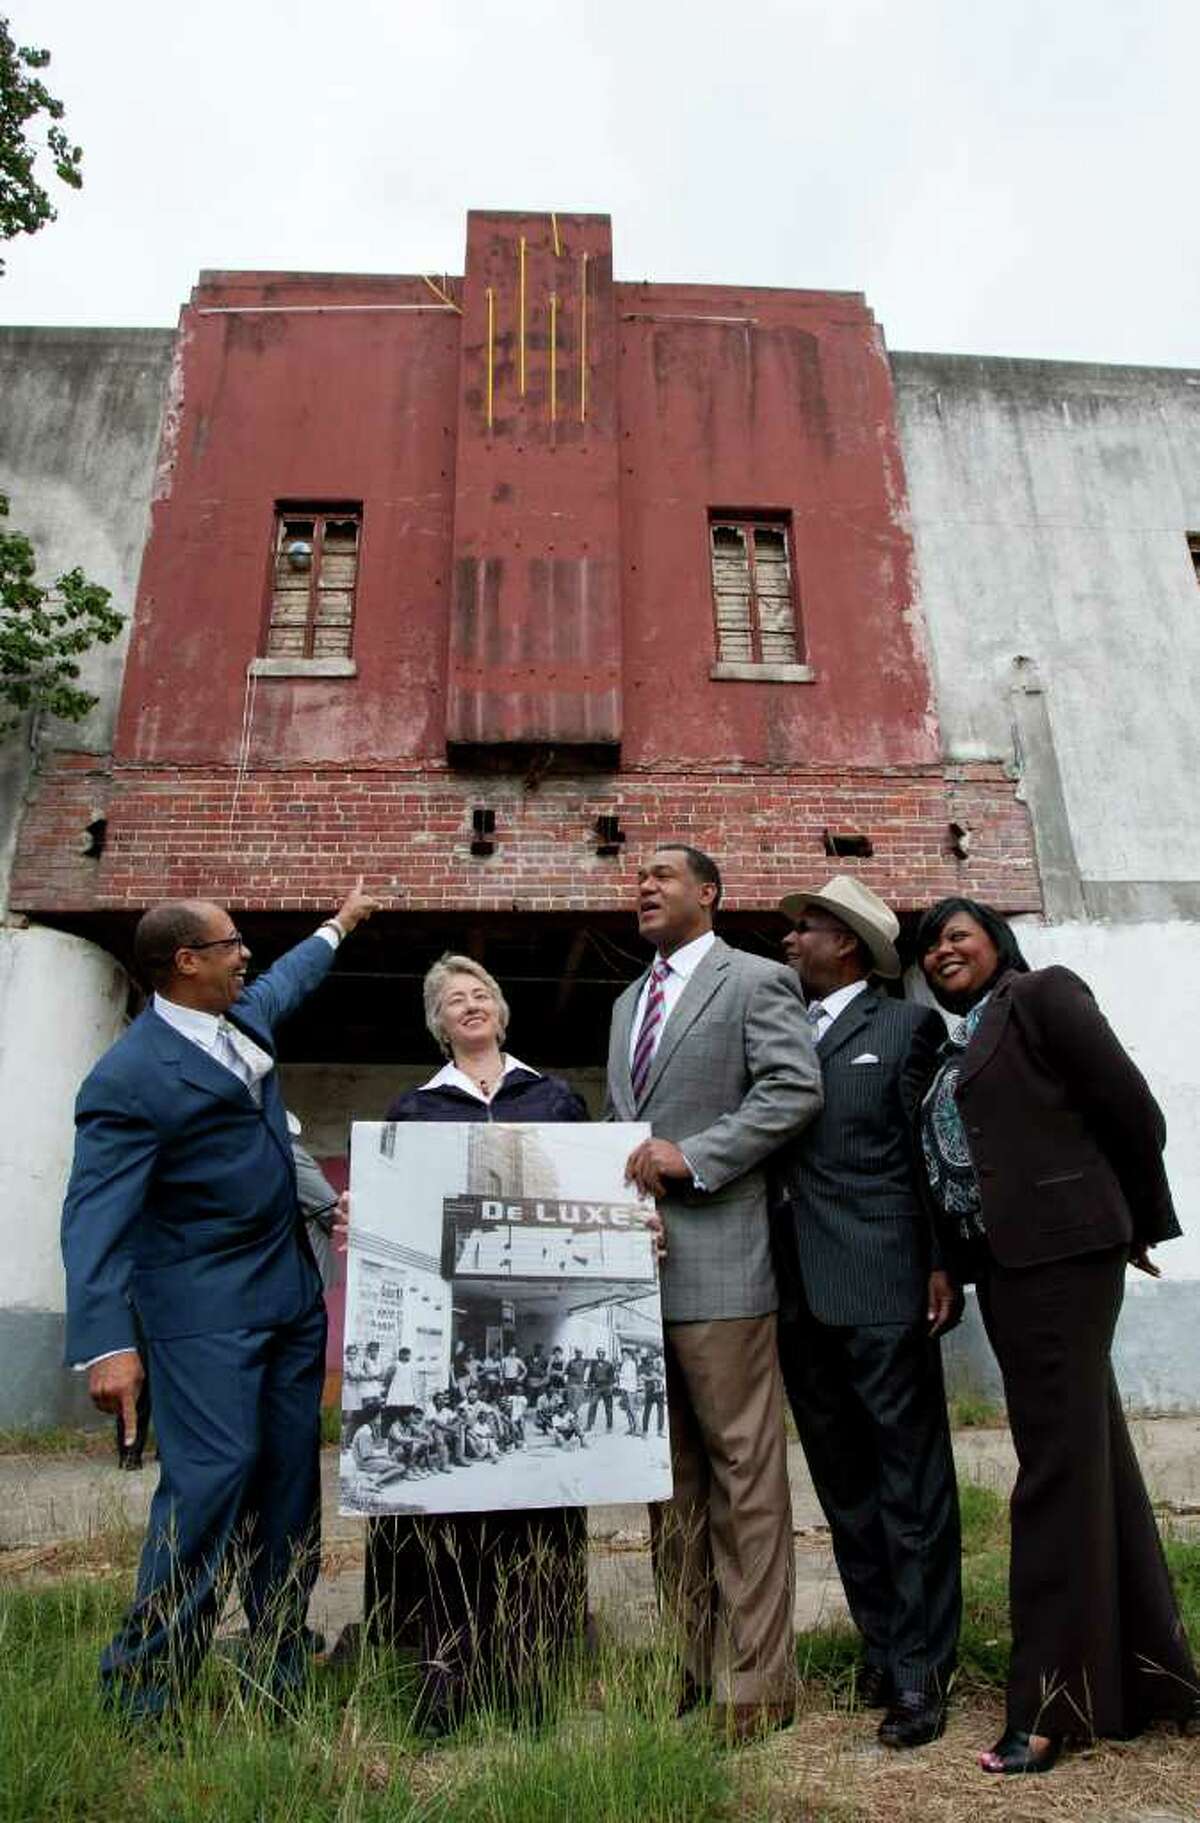 From left, TSU President Dr. John Rudley, Mayor Annise Parker, Councilman Jarvis Johnson, the Rev. Harvey Clemons Jr., and Fifth Ward Community Redevelopment Corp. President Kathy F. Payton gather Friday to announce their plan for the abandoned DeLuxe Theater.